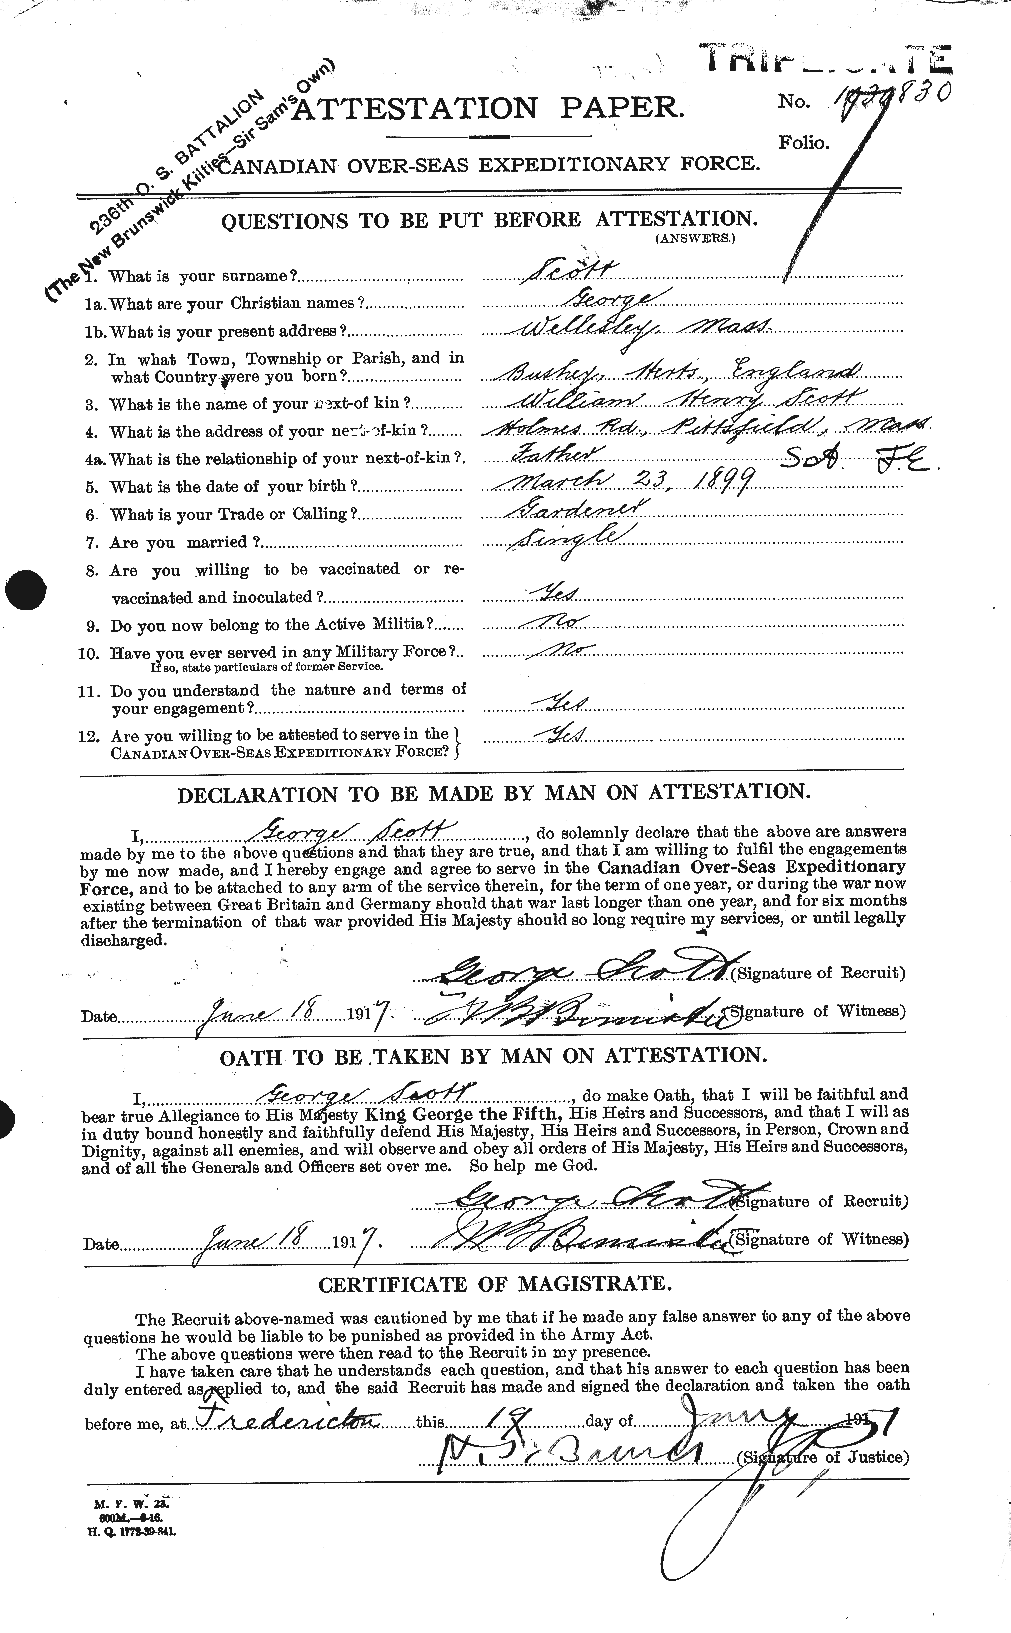 Personnel Records of the First World War - CEF 083590a